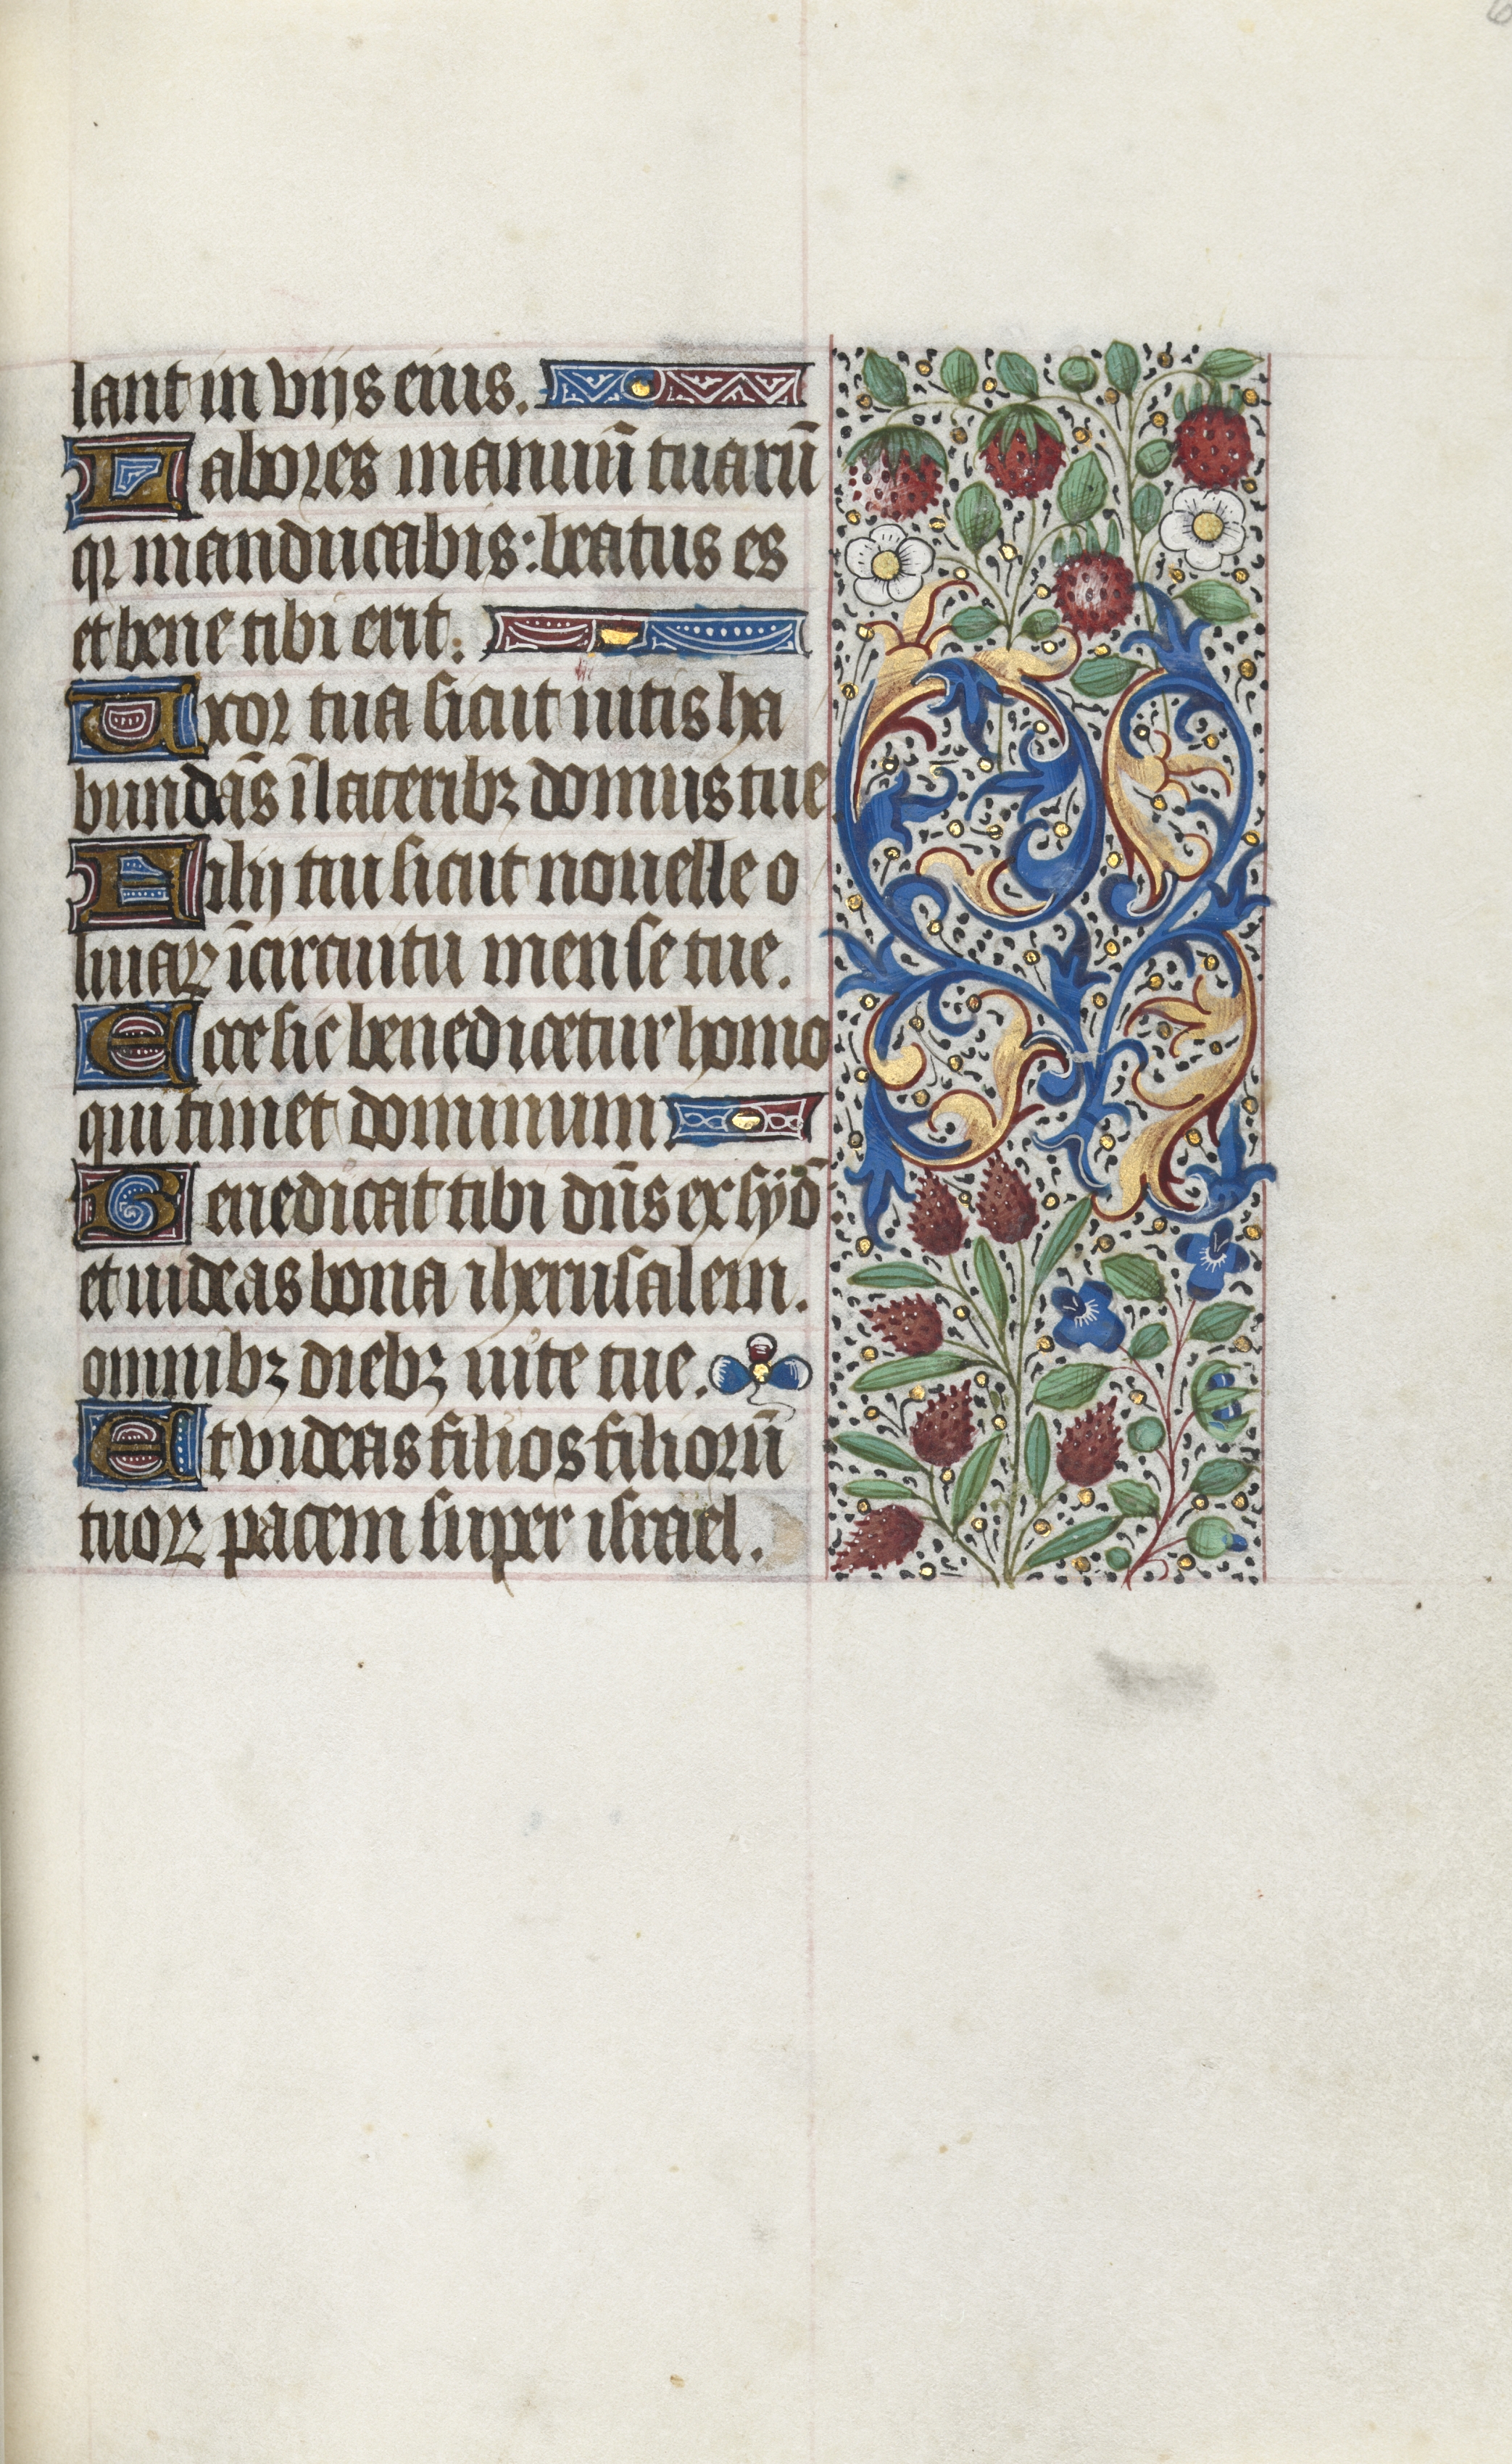 Book of Hours (Use of Rouen): fol. 69r